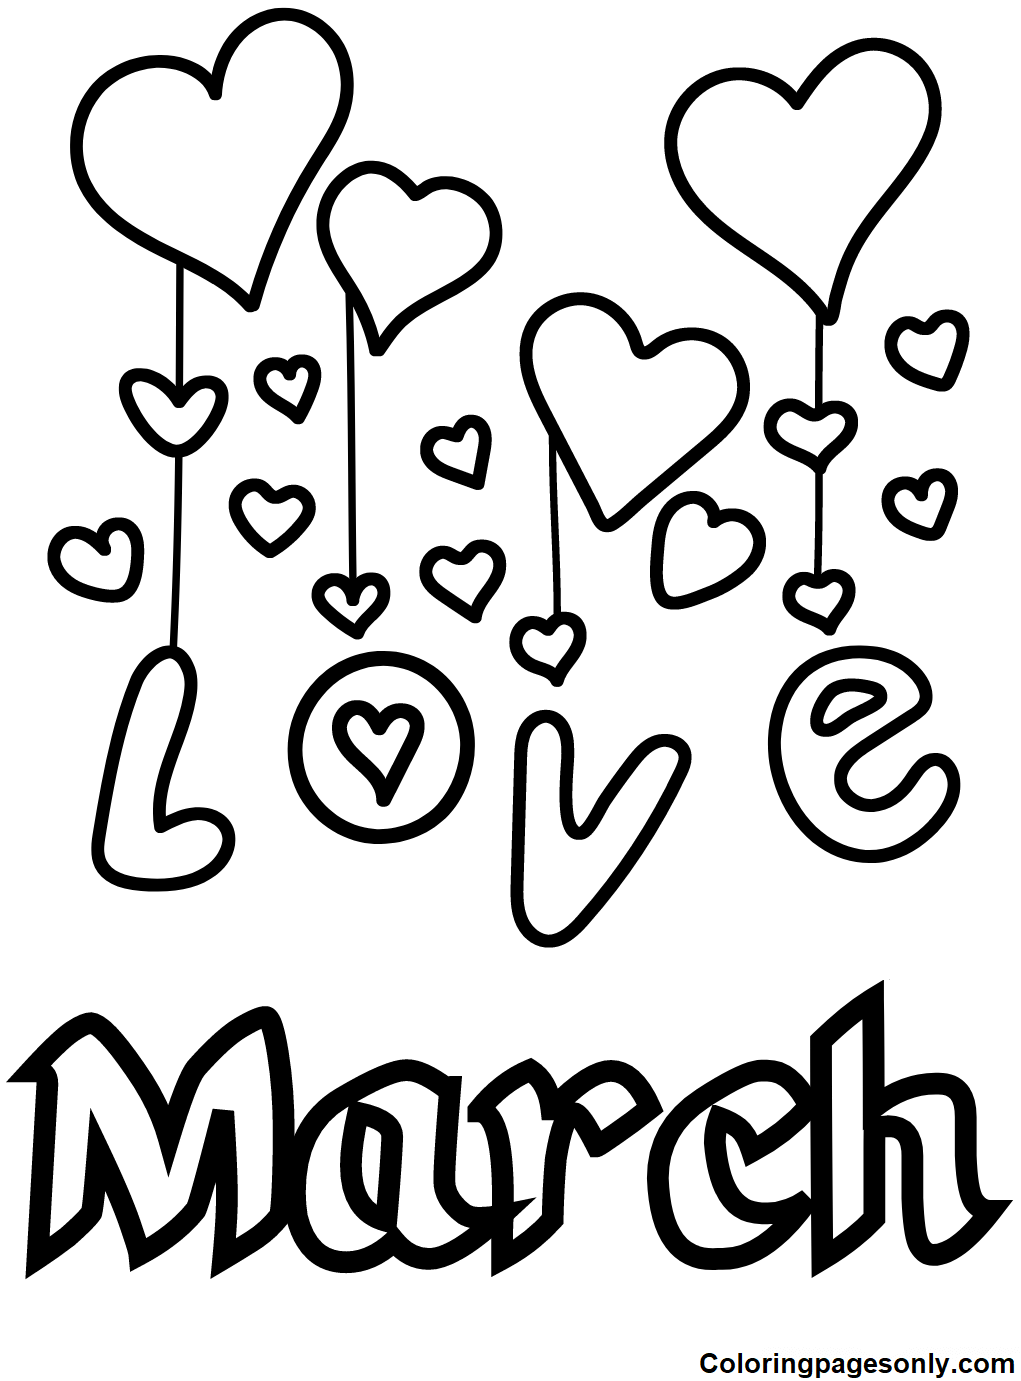 Love March Coloring Pages